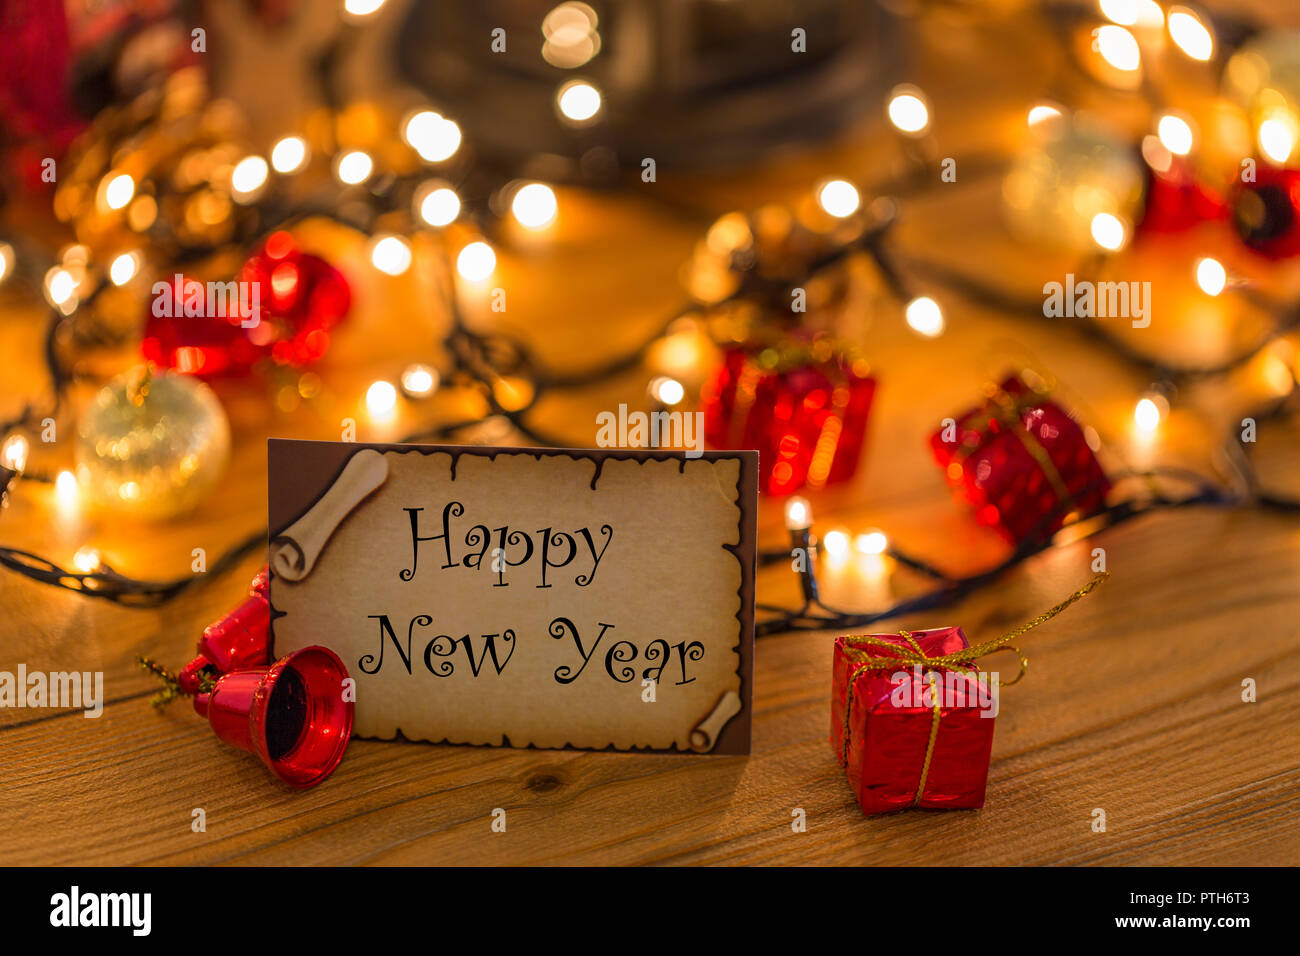 Greeting card for happy new year with christmas decors, lights and lantern Stock Photo